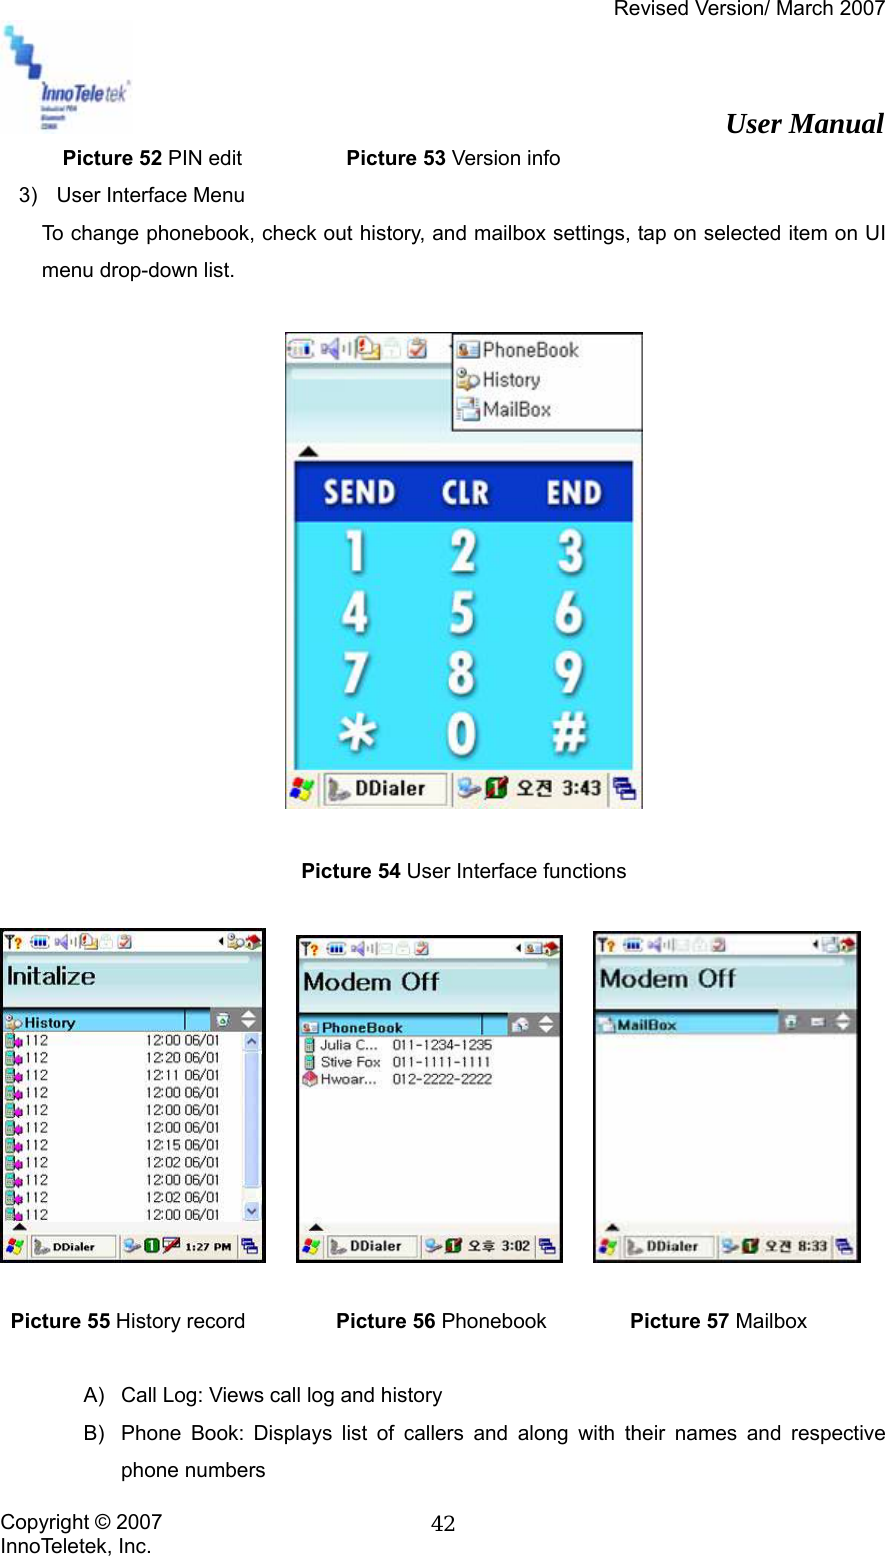 Revised Version/ March 2007                                                          User Manual Copyright © 2007 InnoTeletek, Inc.  42      Picture 52 PIN edit         Picture 53 Version info   3)  User Interface Menu To change phonebook, check out history, and mailbox settings, tap on selected item on UI menu drop-down list.    Picture 54 User Interface functions                Picture 55 History record     Picture 56 Phonebook        Picture 57 Mailbox  A)  Call Log: Views call log and history B)  Phone Book: Displays list of callers and along with their names and respective phone numbers 